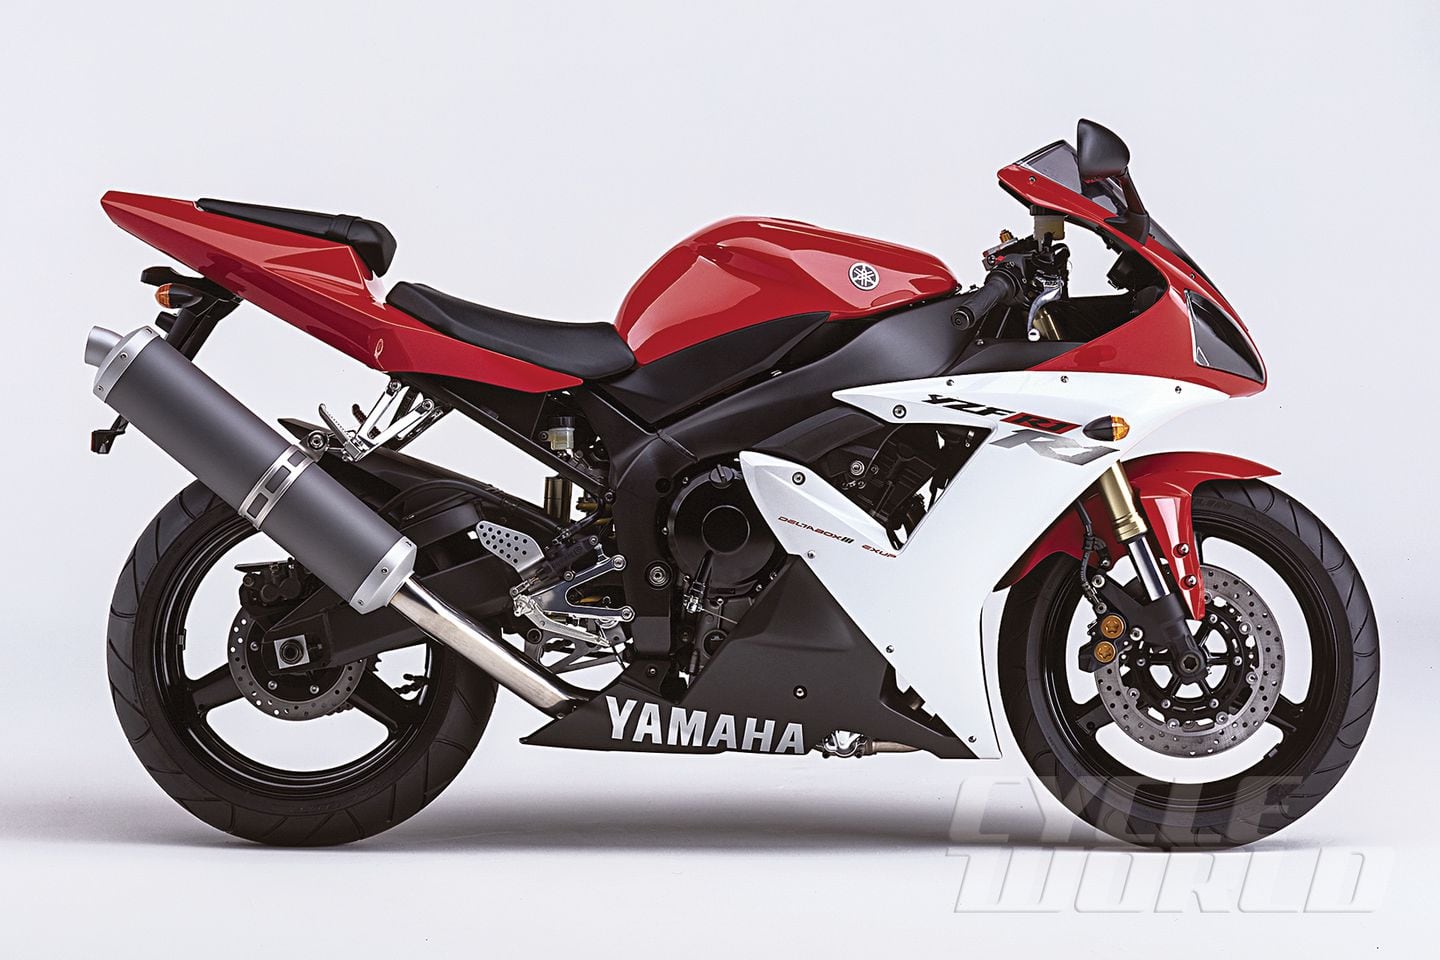 Yamaha R1 Motorbike Review By SuperBike Factory